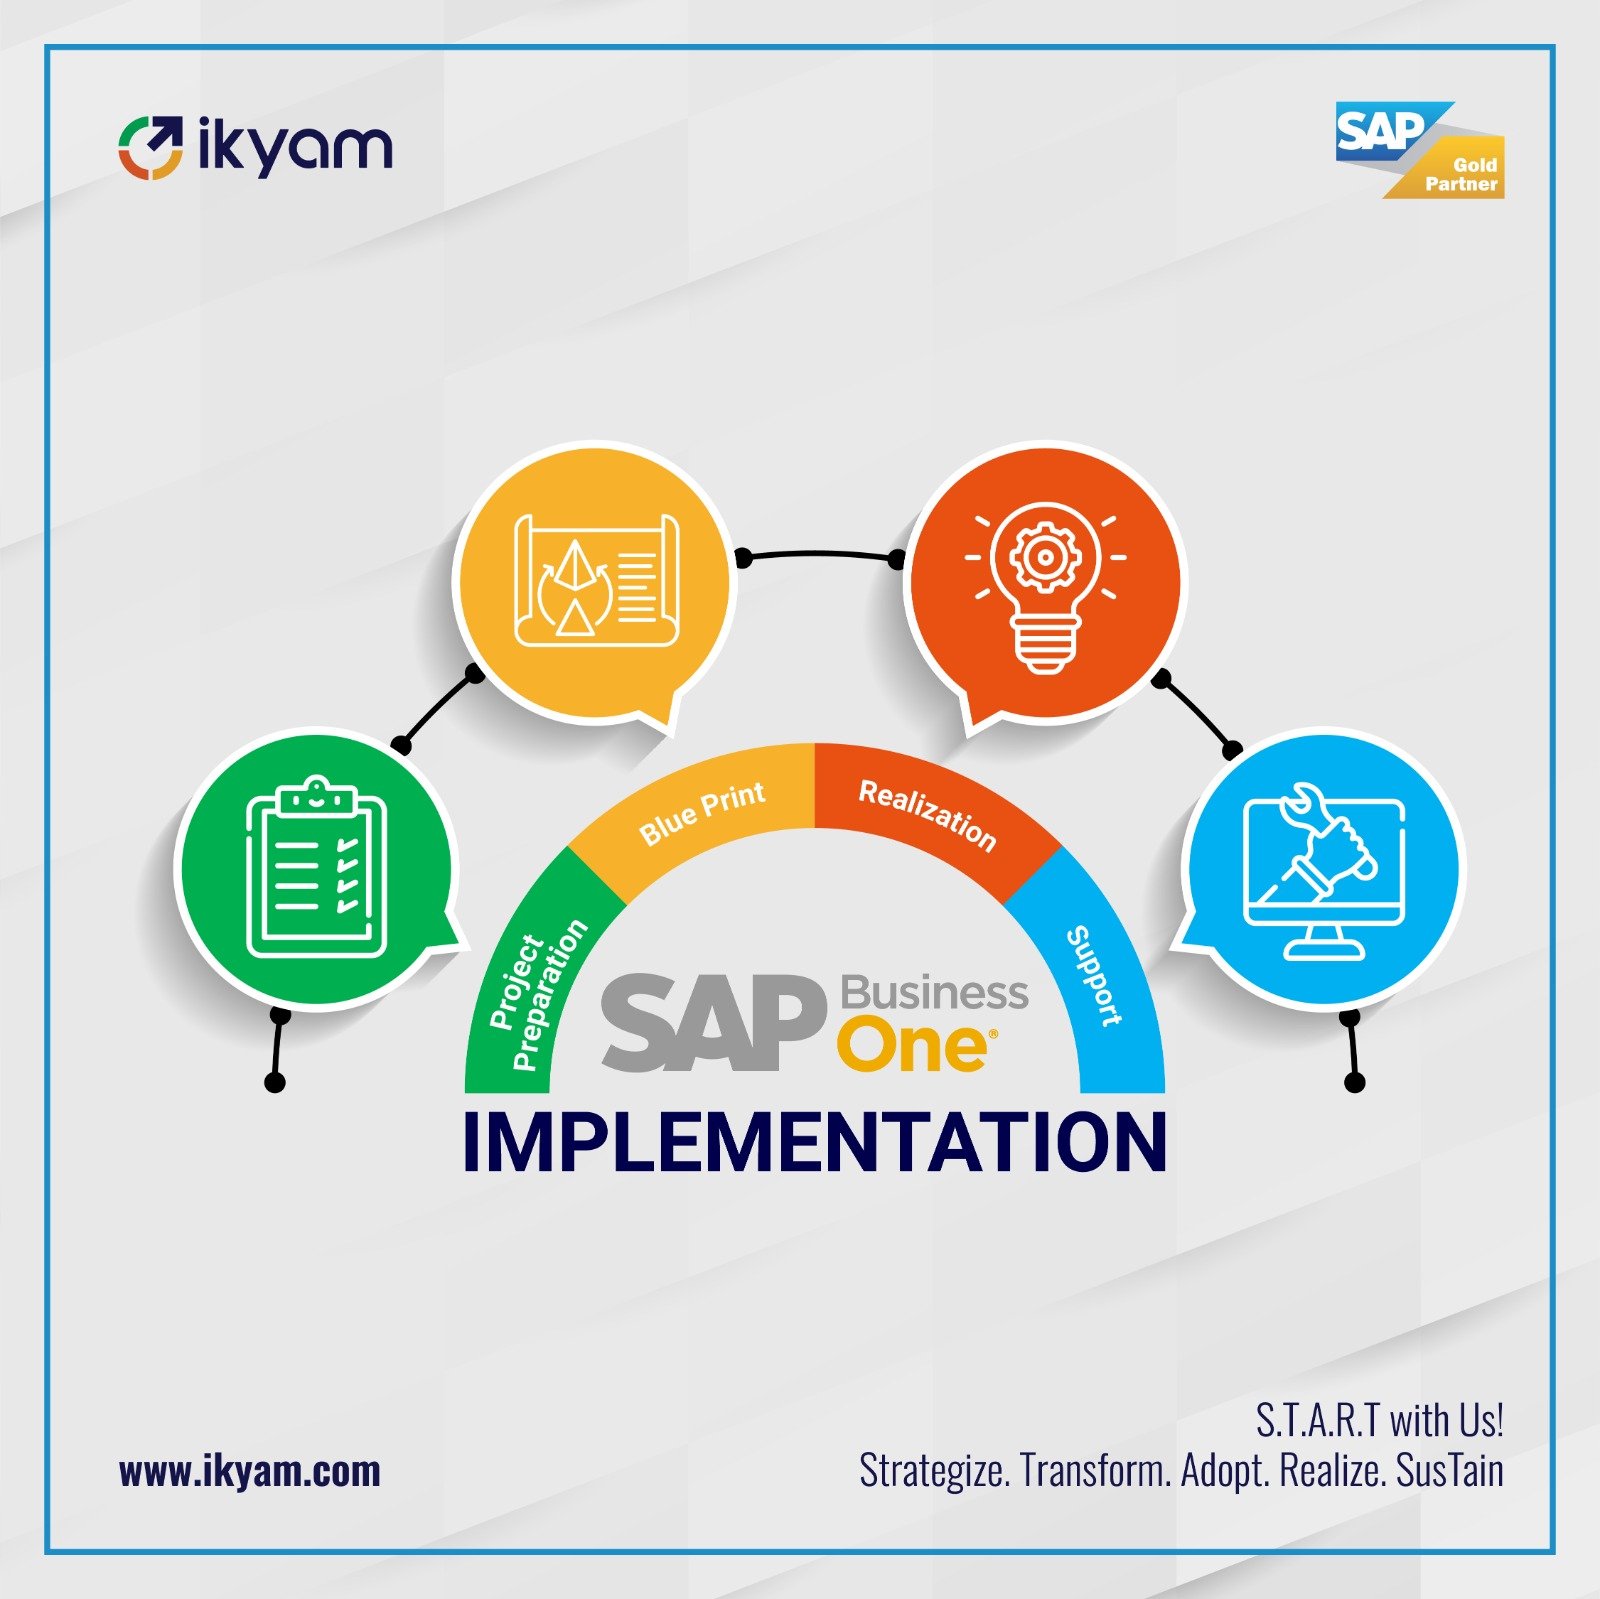 SAP Business One Implementation Partners